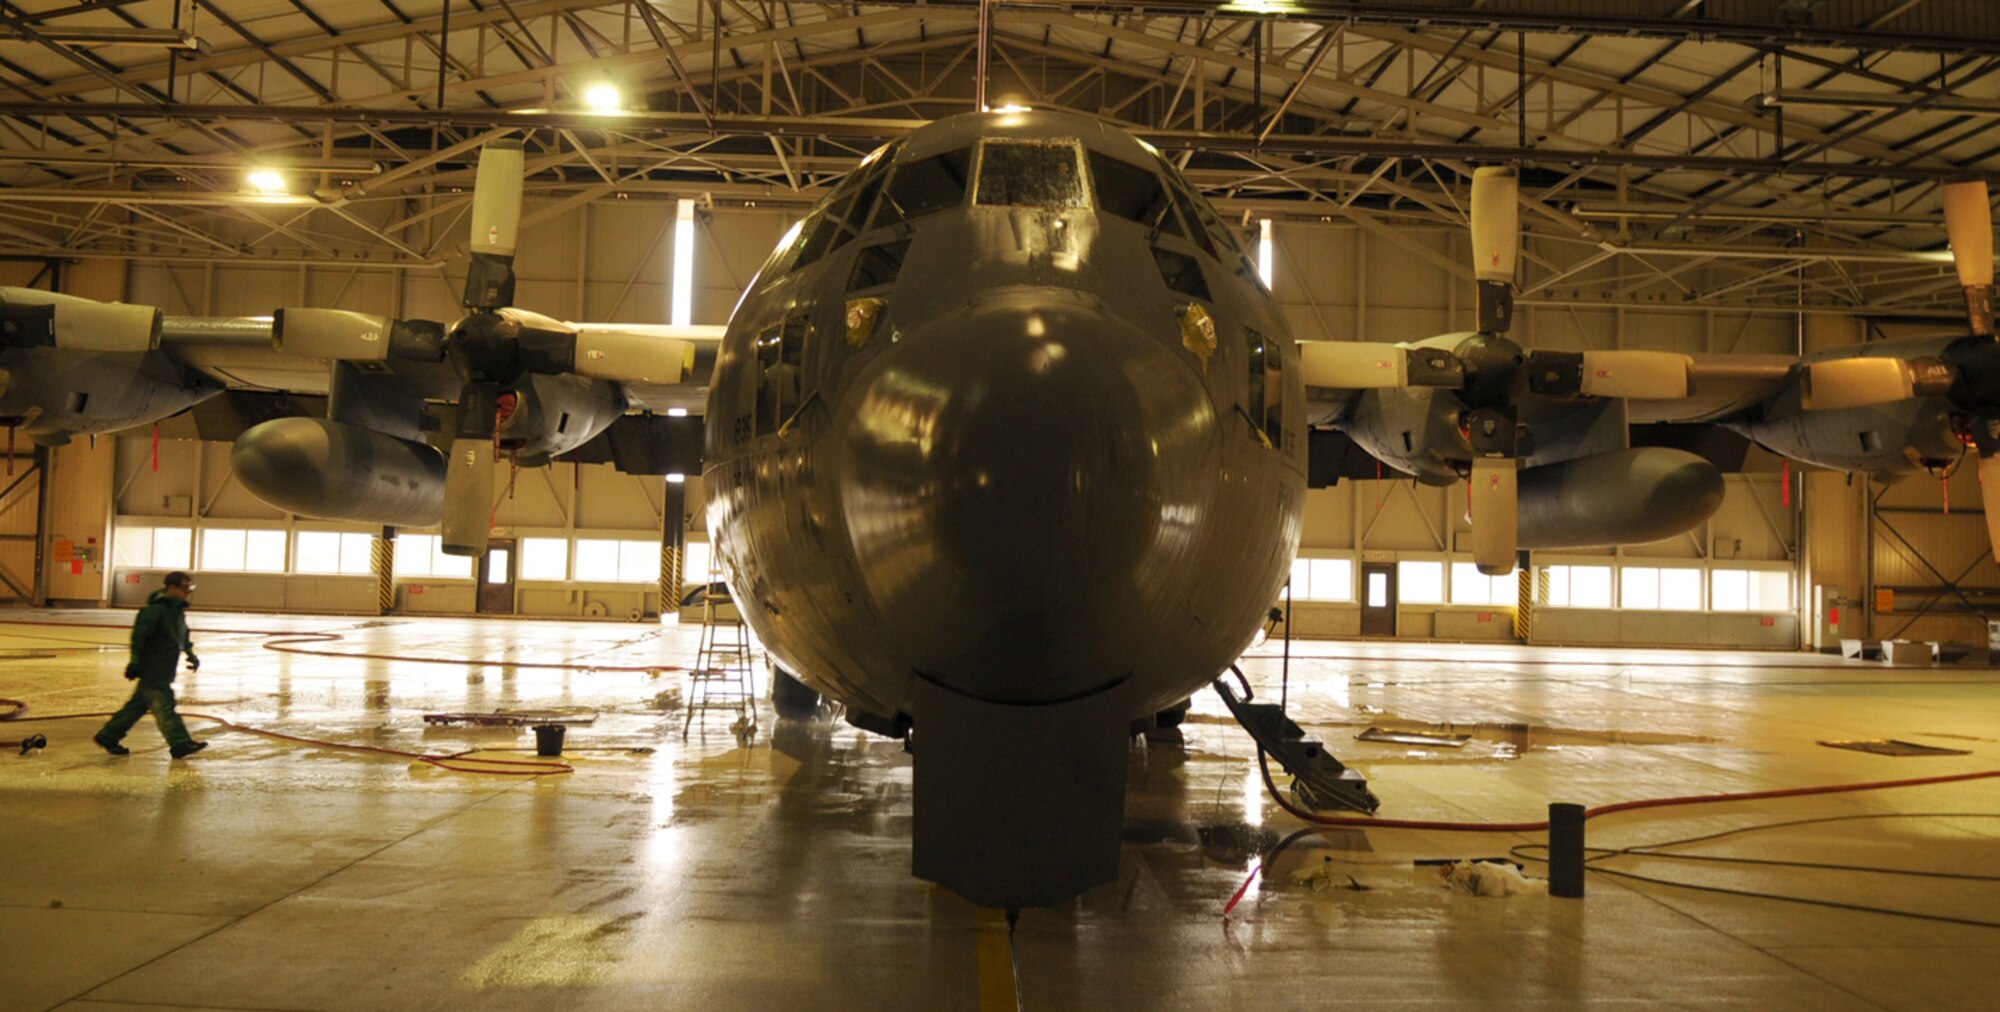 Members from the 86th Aircraft Maintenance Squadron prepare to wash a C-130E Hercules in Hangar 1, Ramstein Air Base, Germany, Oct. 28, 2008. The wash crew is made up of a 12-member team from the 86th AMXS who wash aircraft every 90 days to keep them mission ready. (U.S. Air Force photo by Airman 1st Class Scott Saldukas)